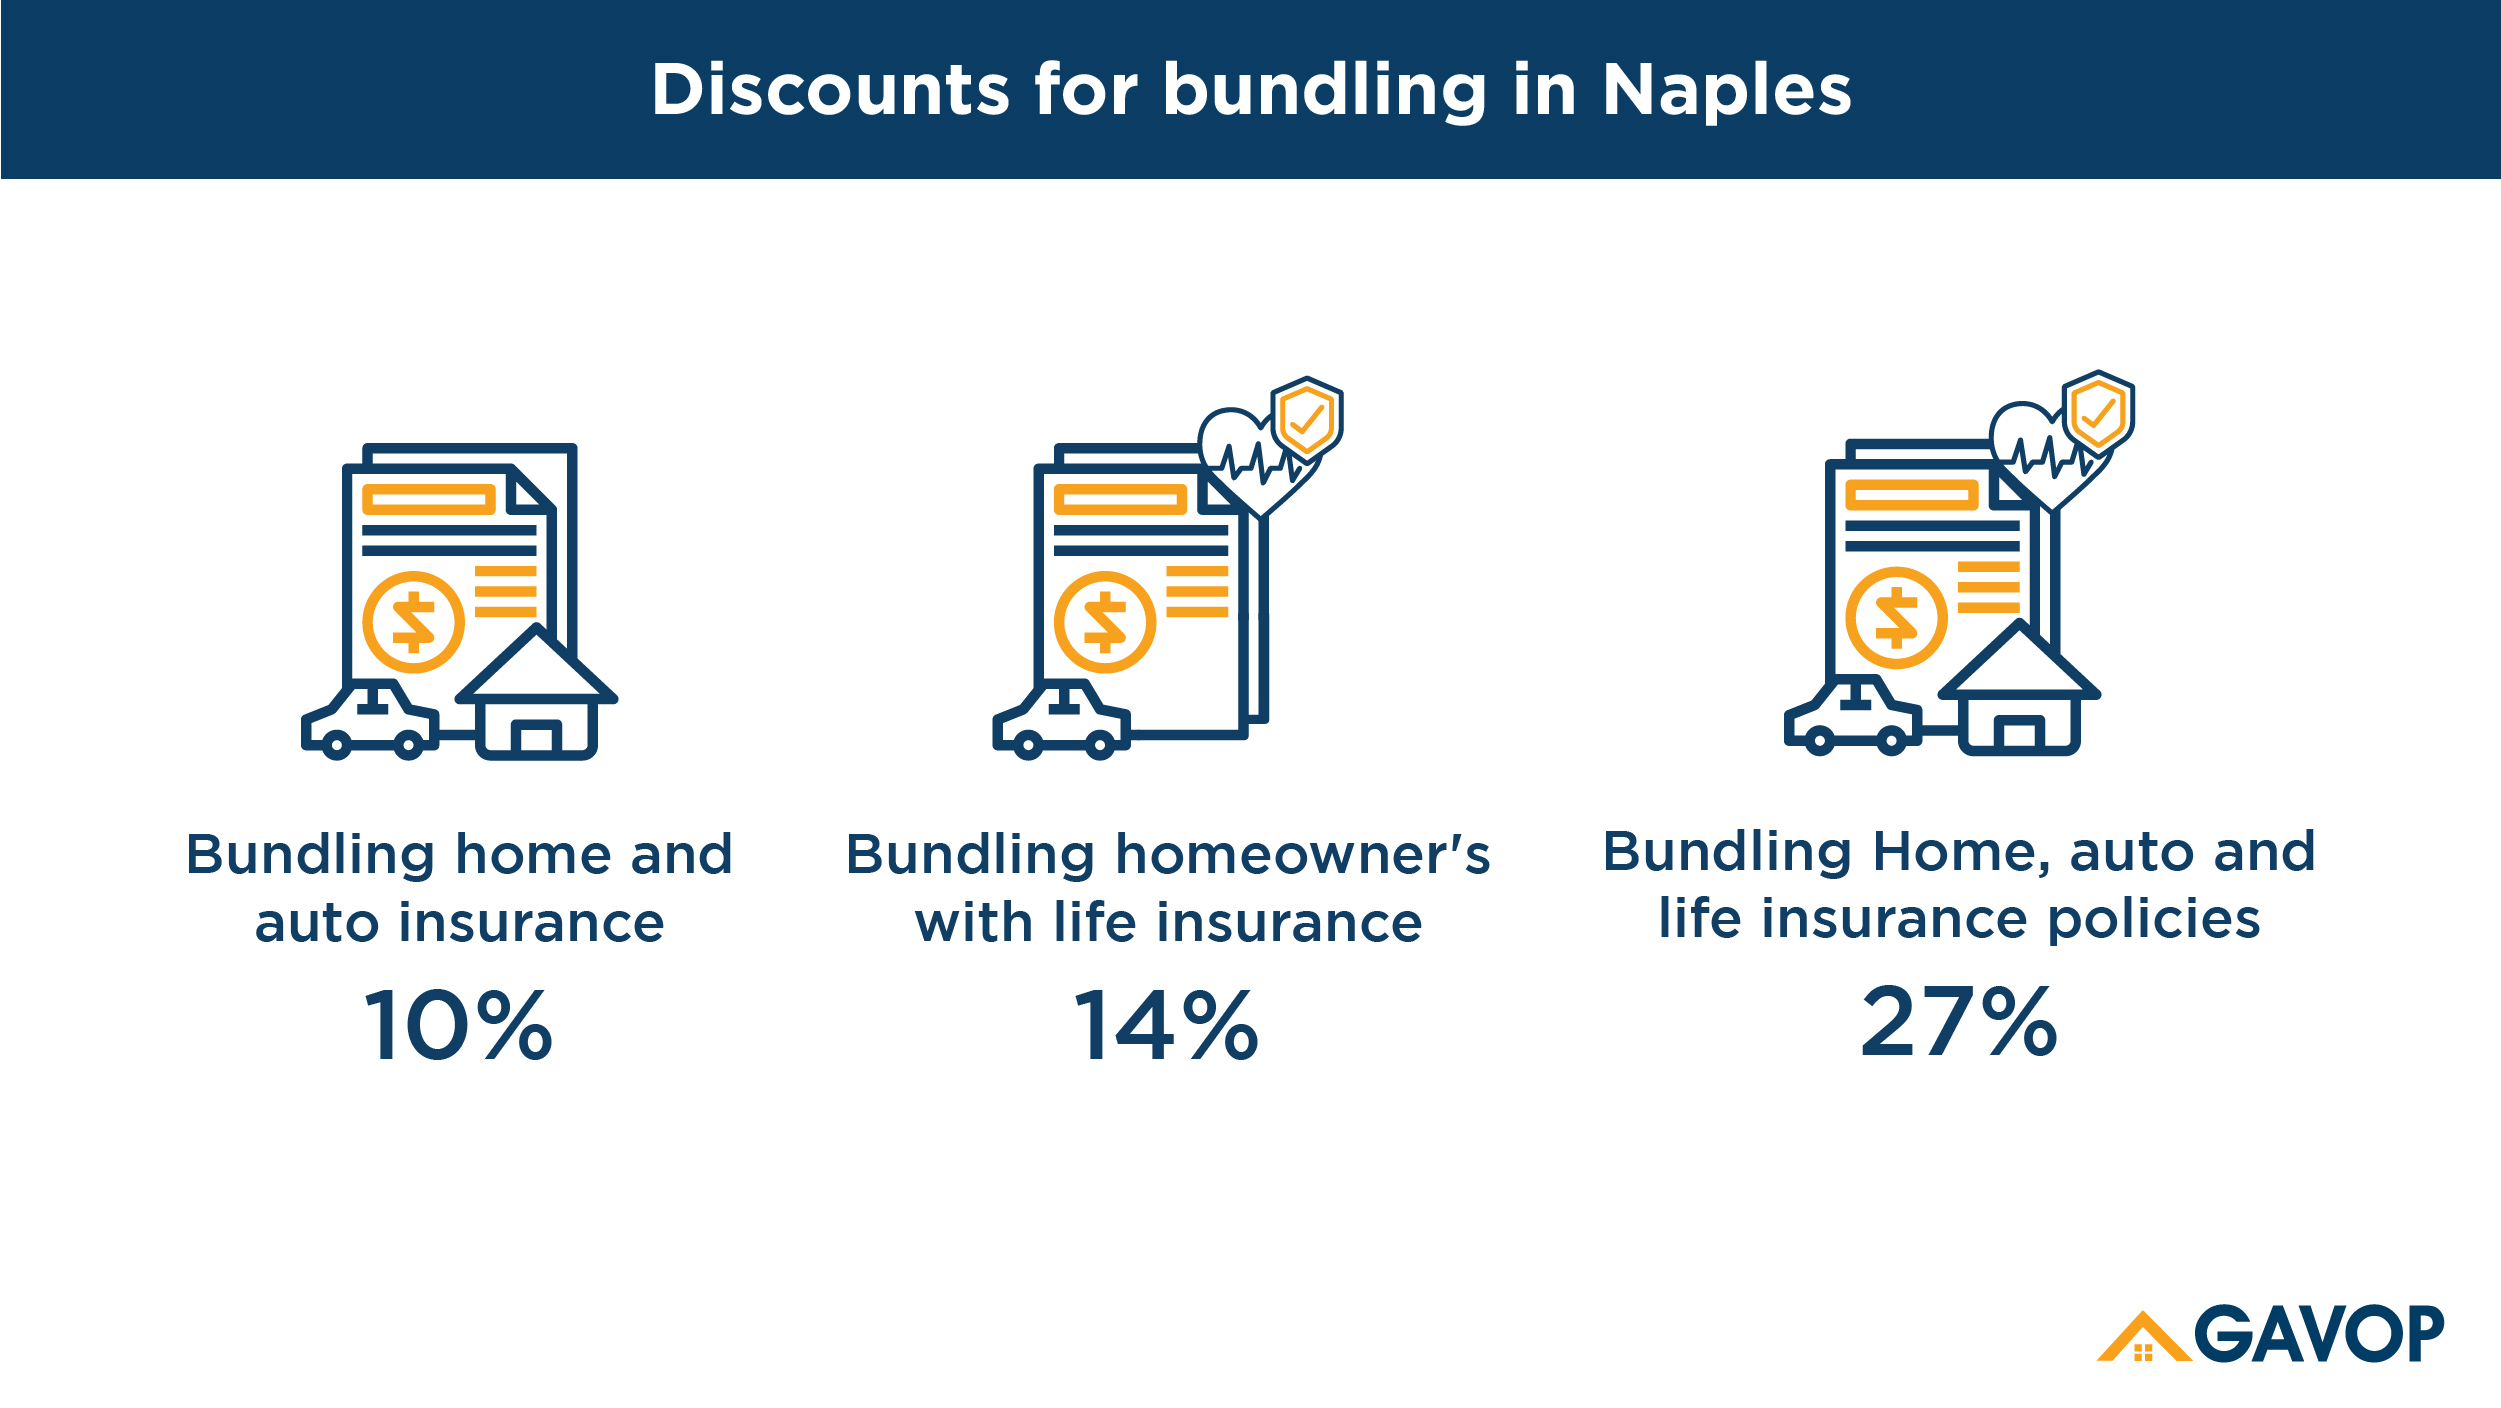 Naples, FL, homeowners can save up to $236 on home insurance costs